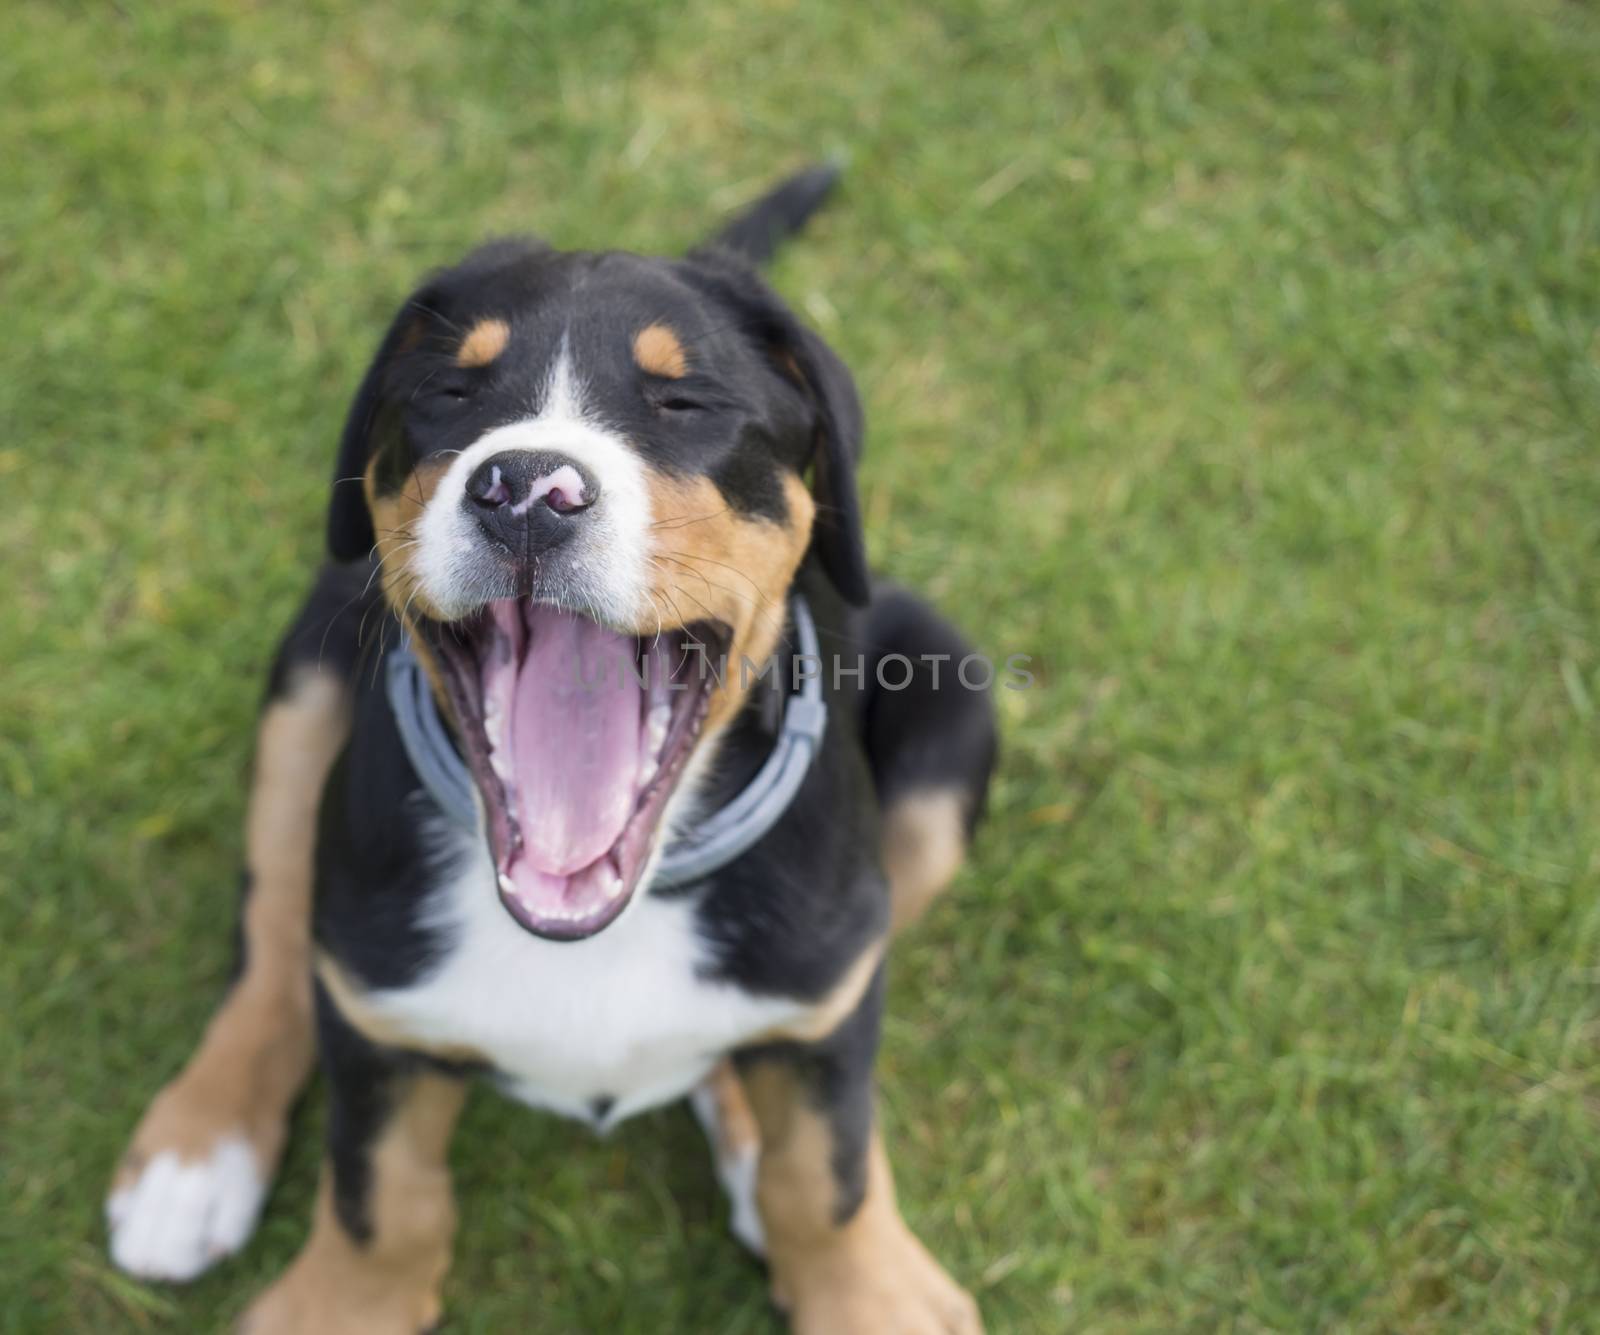 yawning cute close up greater swiss mountain dog puppy portrait sitting in the green grass selective focus